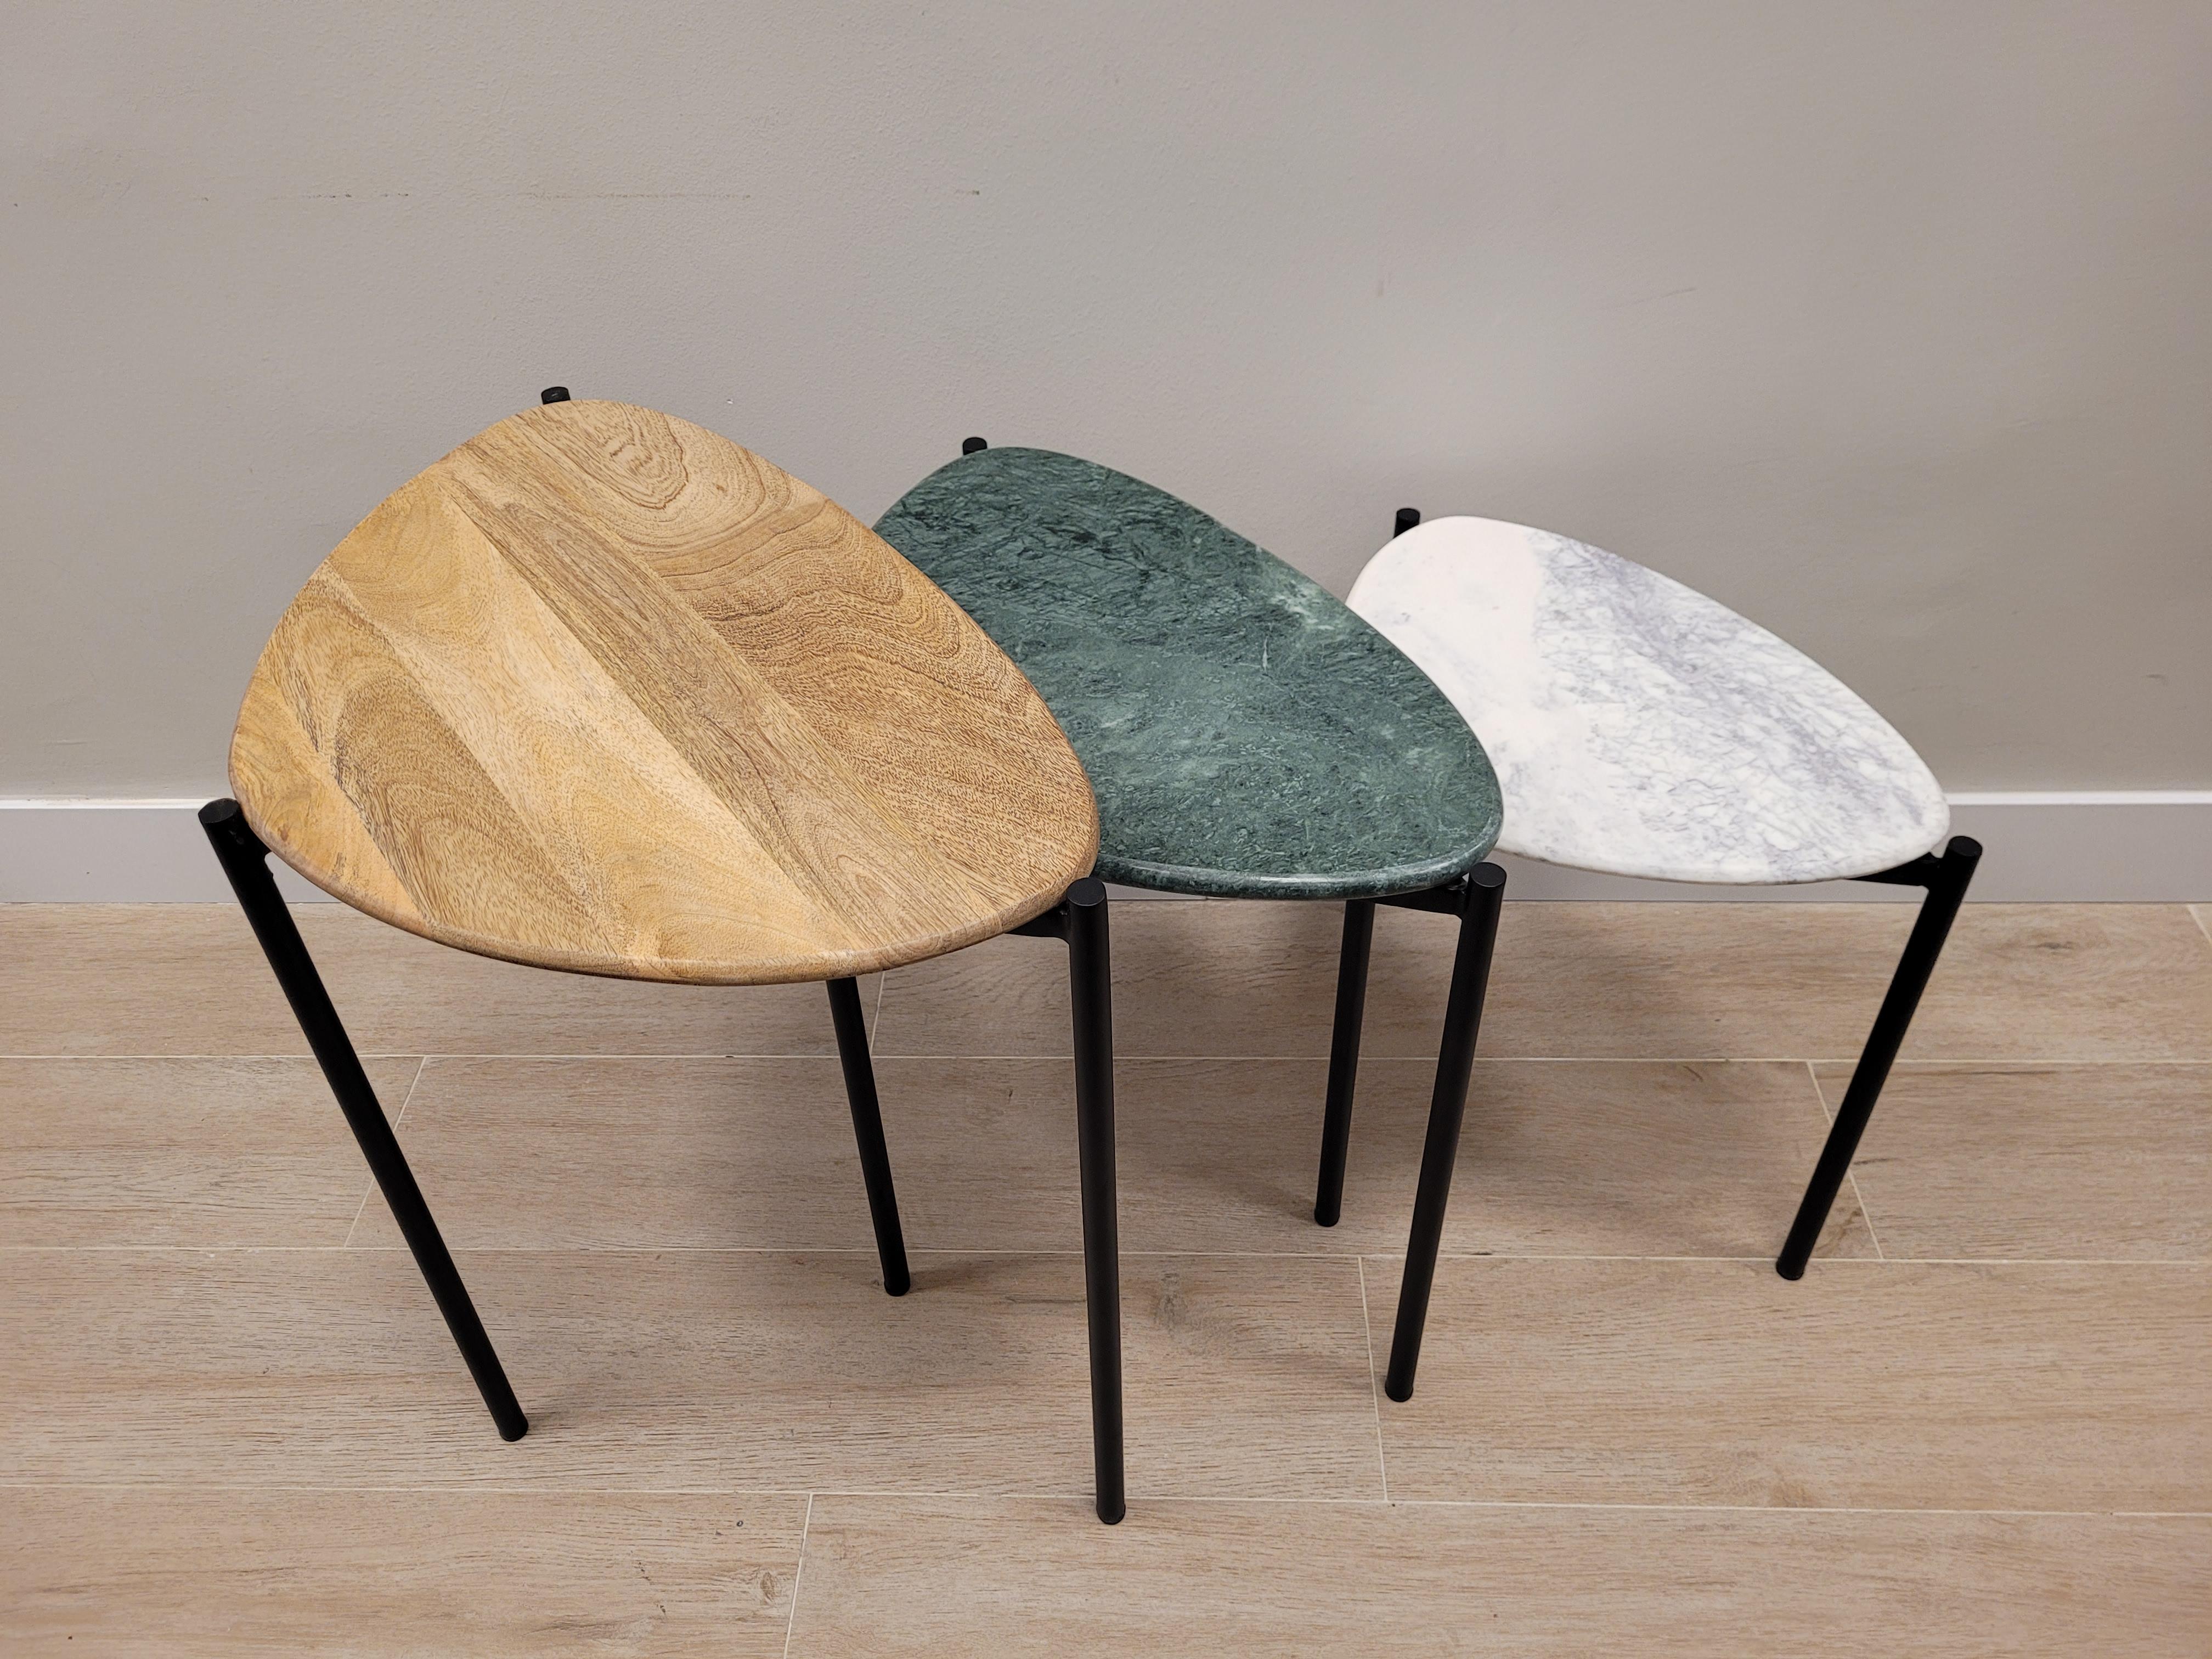 Hand-Crafted Set of 3 End-Tables Green, White Marble and Wood 21st Century, Side Table For Sale